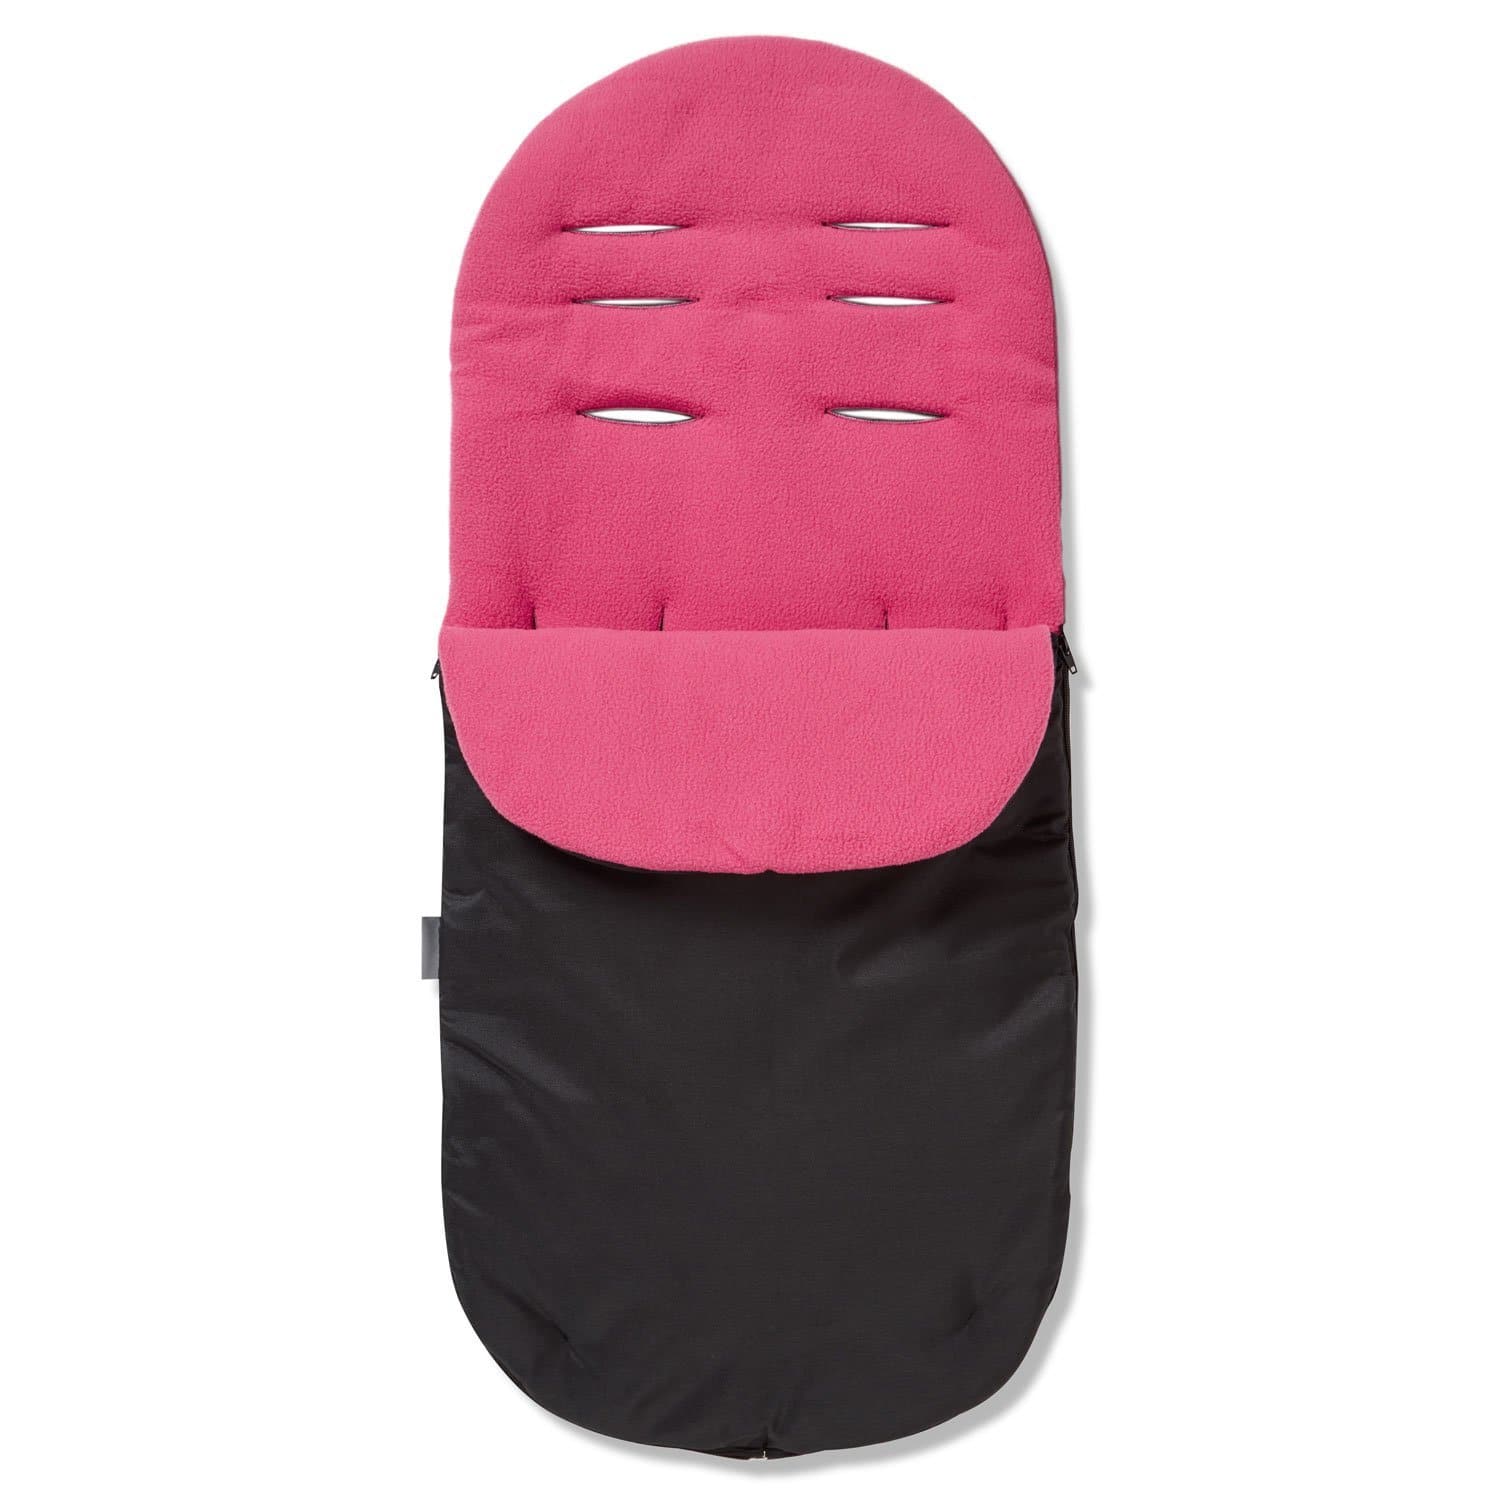 Footmuff / Cosy Toes Compatible with BabiesRus - Dark Pink / Fits All Models | For Your Little One